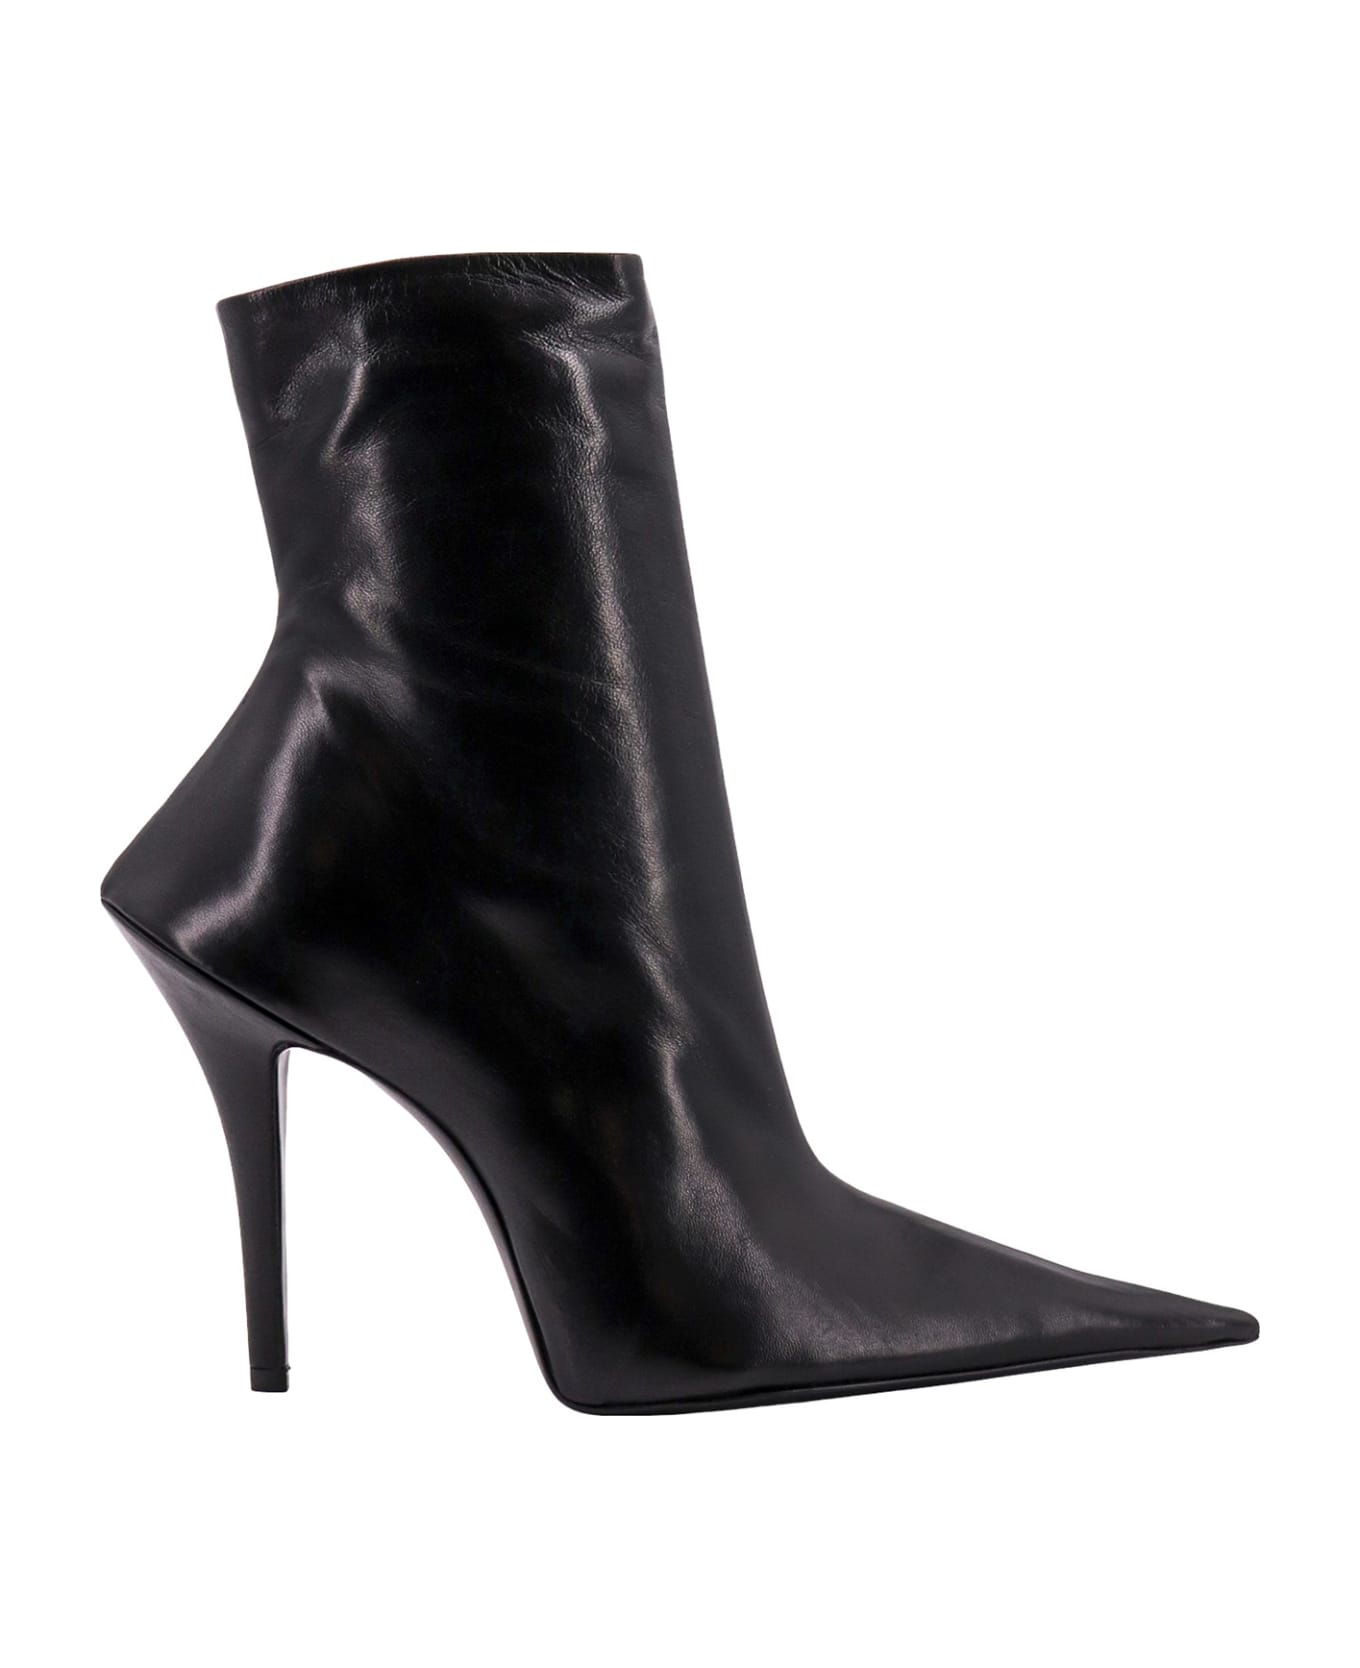 Balenciaga Witch Ankle Boots - Black